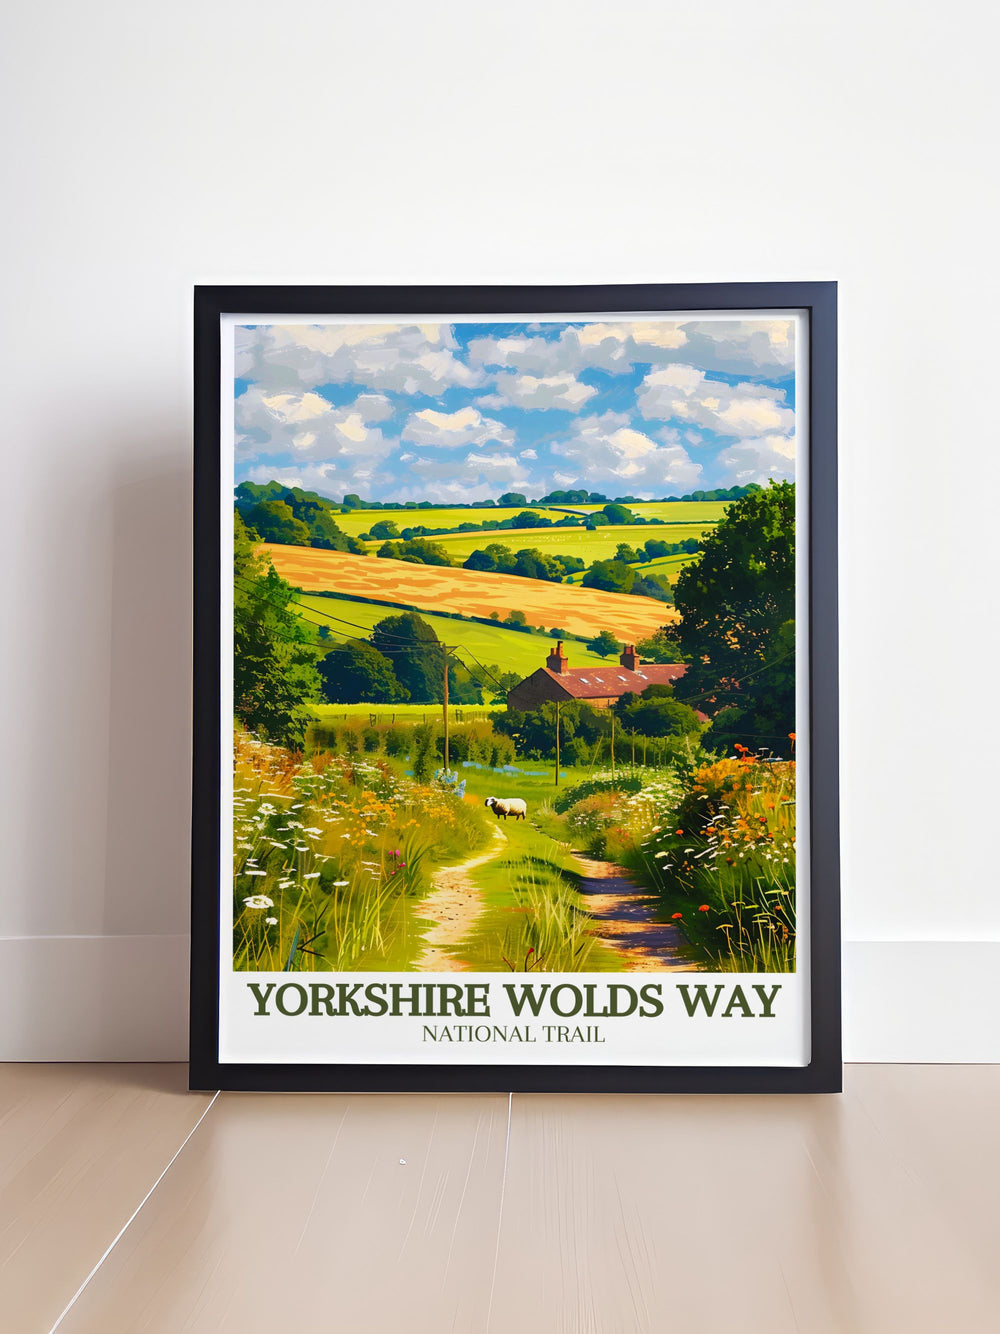 Beautiful home decor print featuring the charming town of Hessle, the starting point of the Yorkshire Wolds Way. This artwork brings to life the towns historic streets, iconic Humber Bridge, and vibrant local culture, offering a perfect blend of history and natural beauty for your living space.